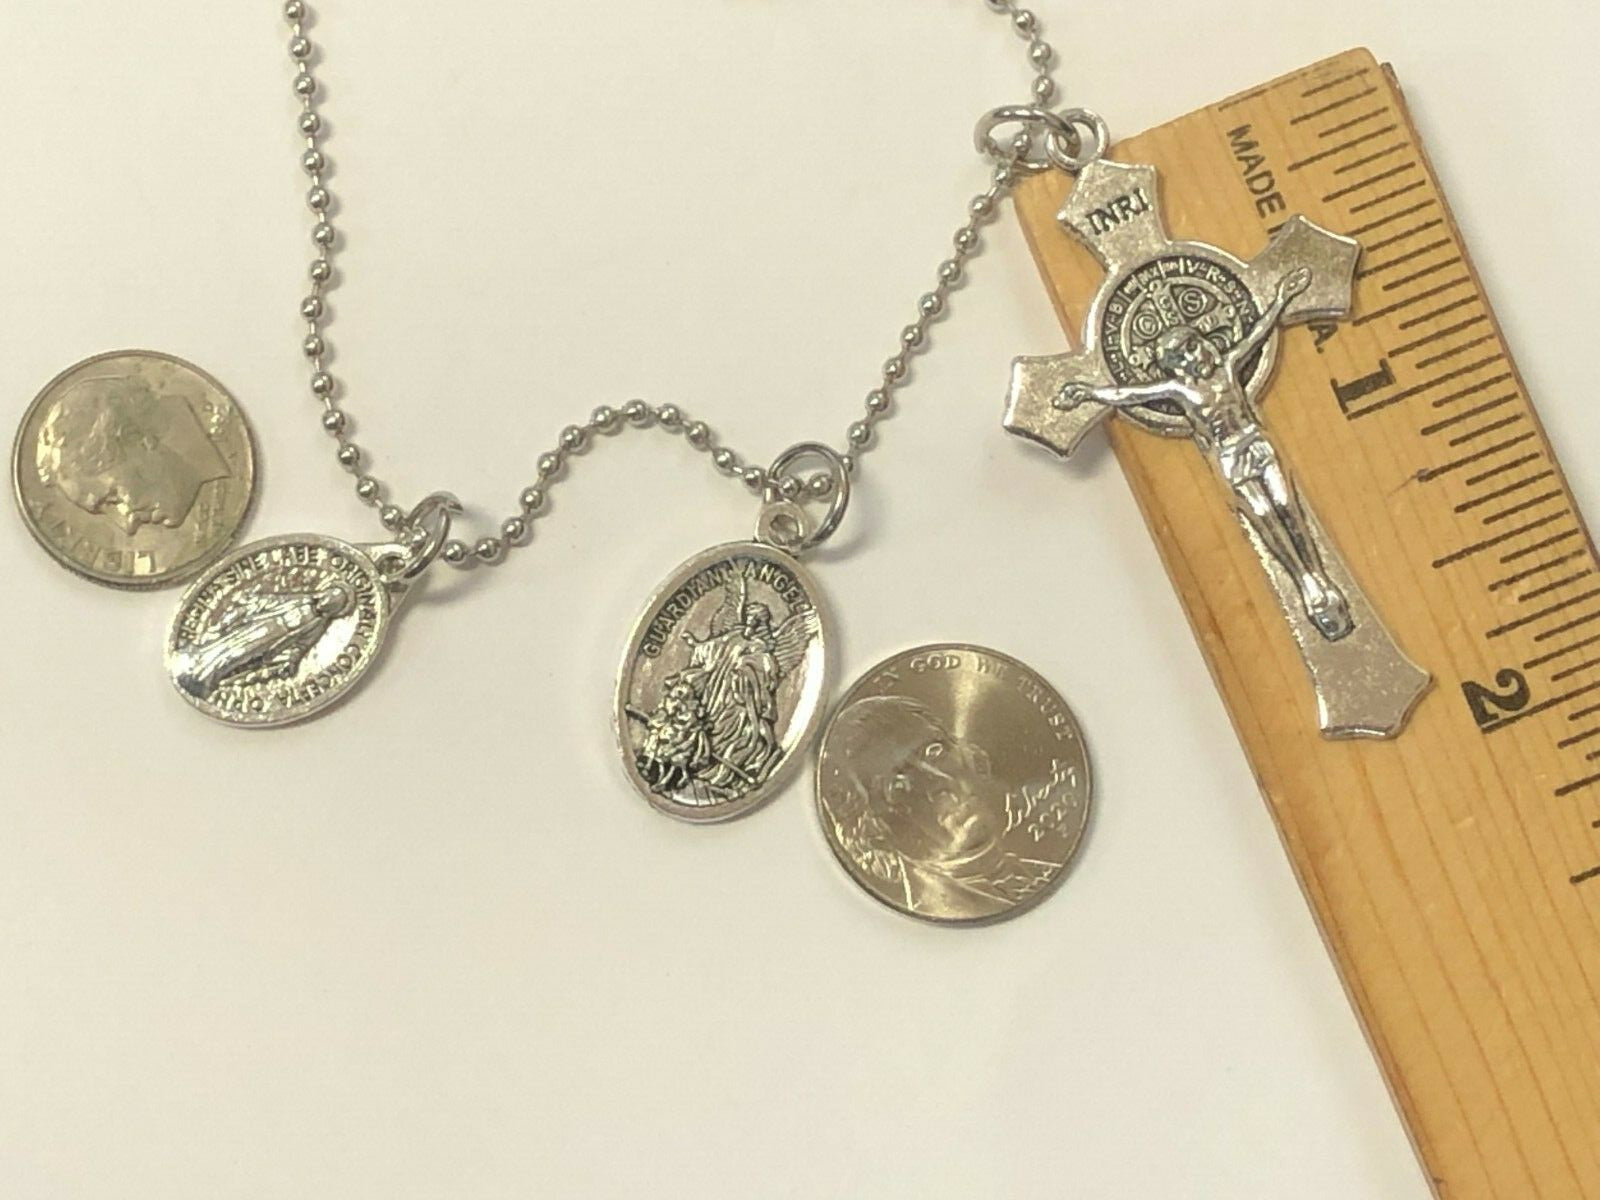 Saint Benedict, Saint Michael & Miraculous Medal  Crucifix + Medals, New - Bob and Penny Lord